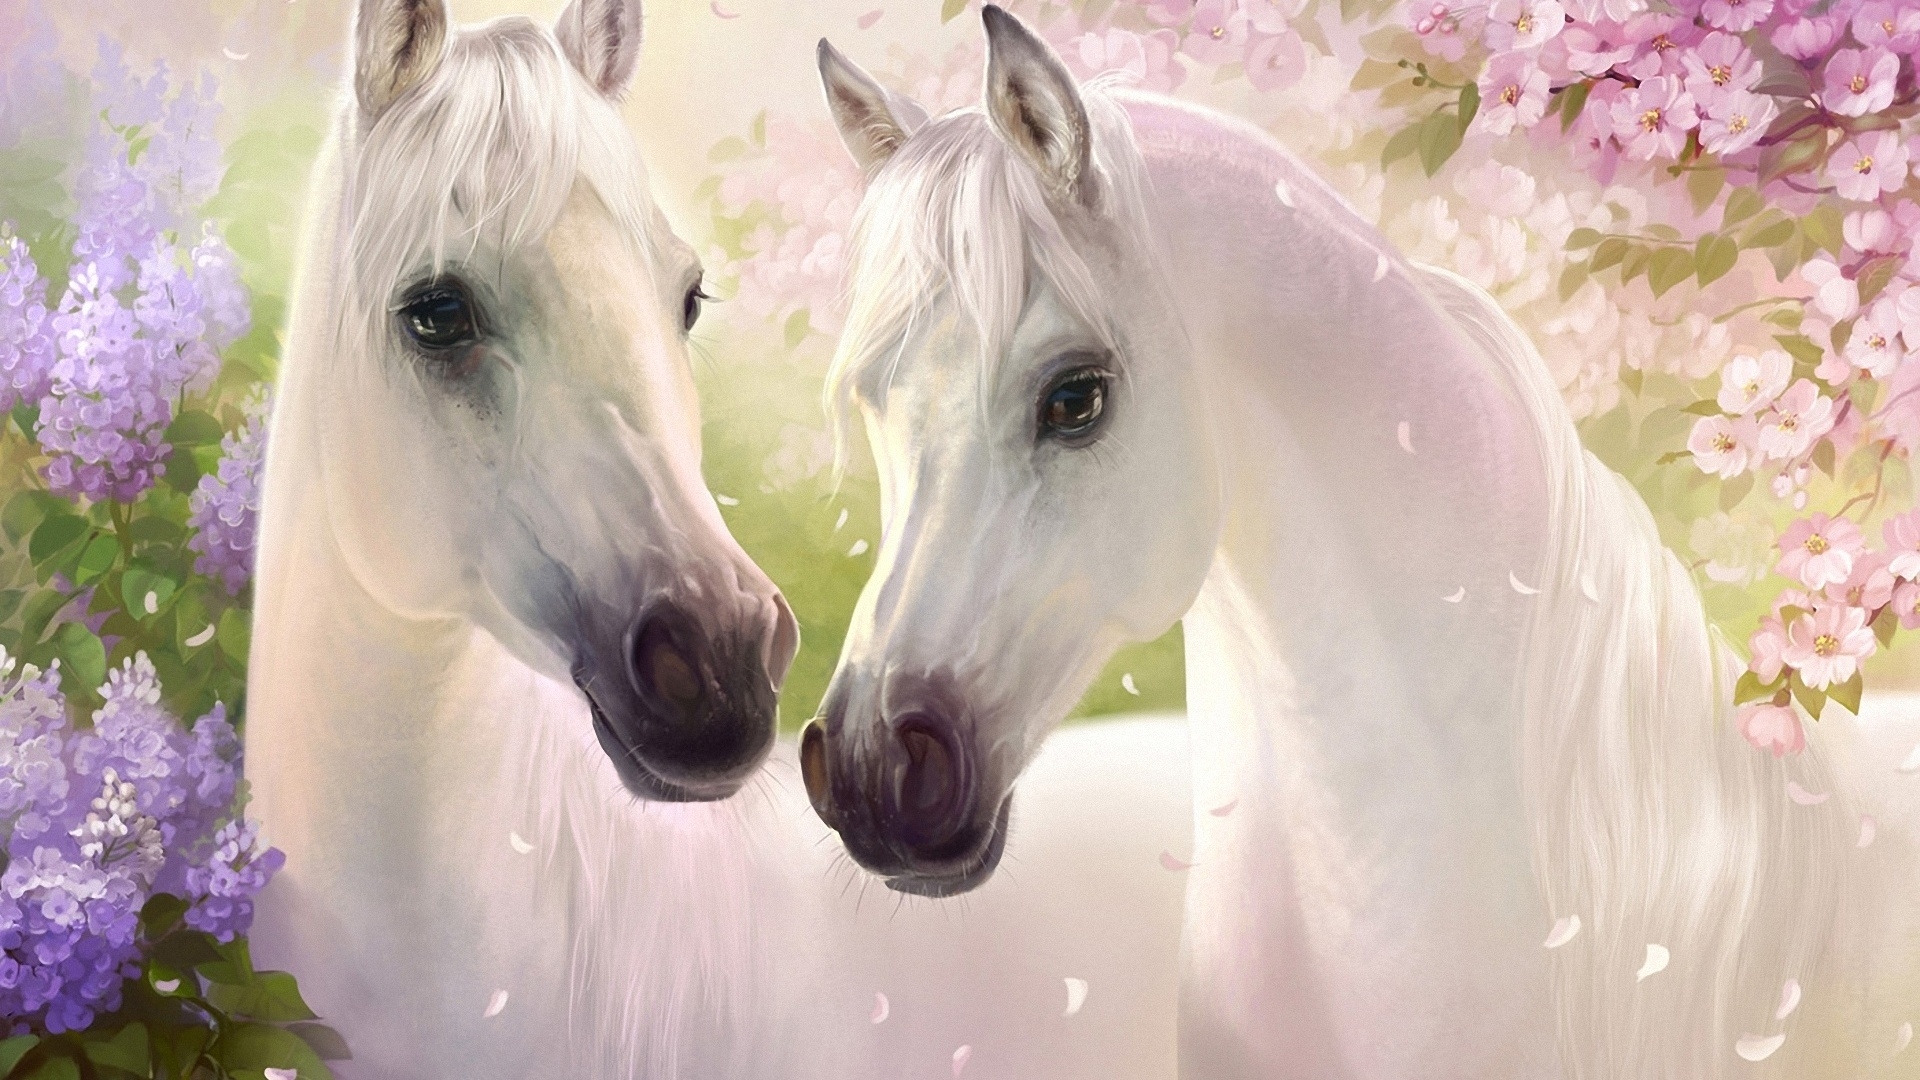 White Horses Wallpapers - Wallpaper Cave